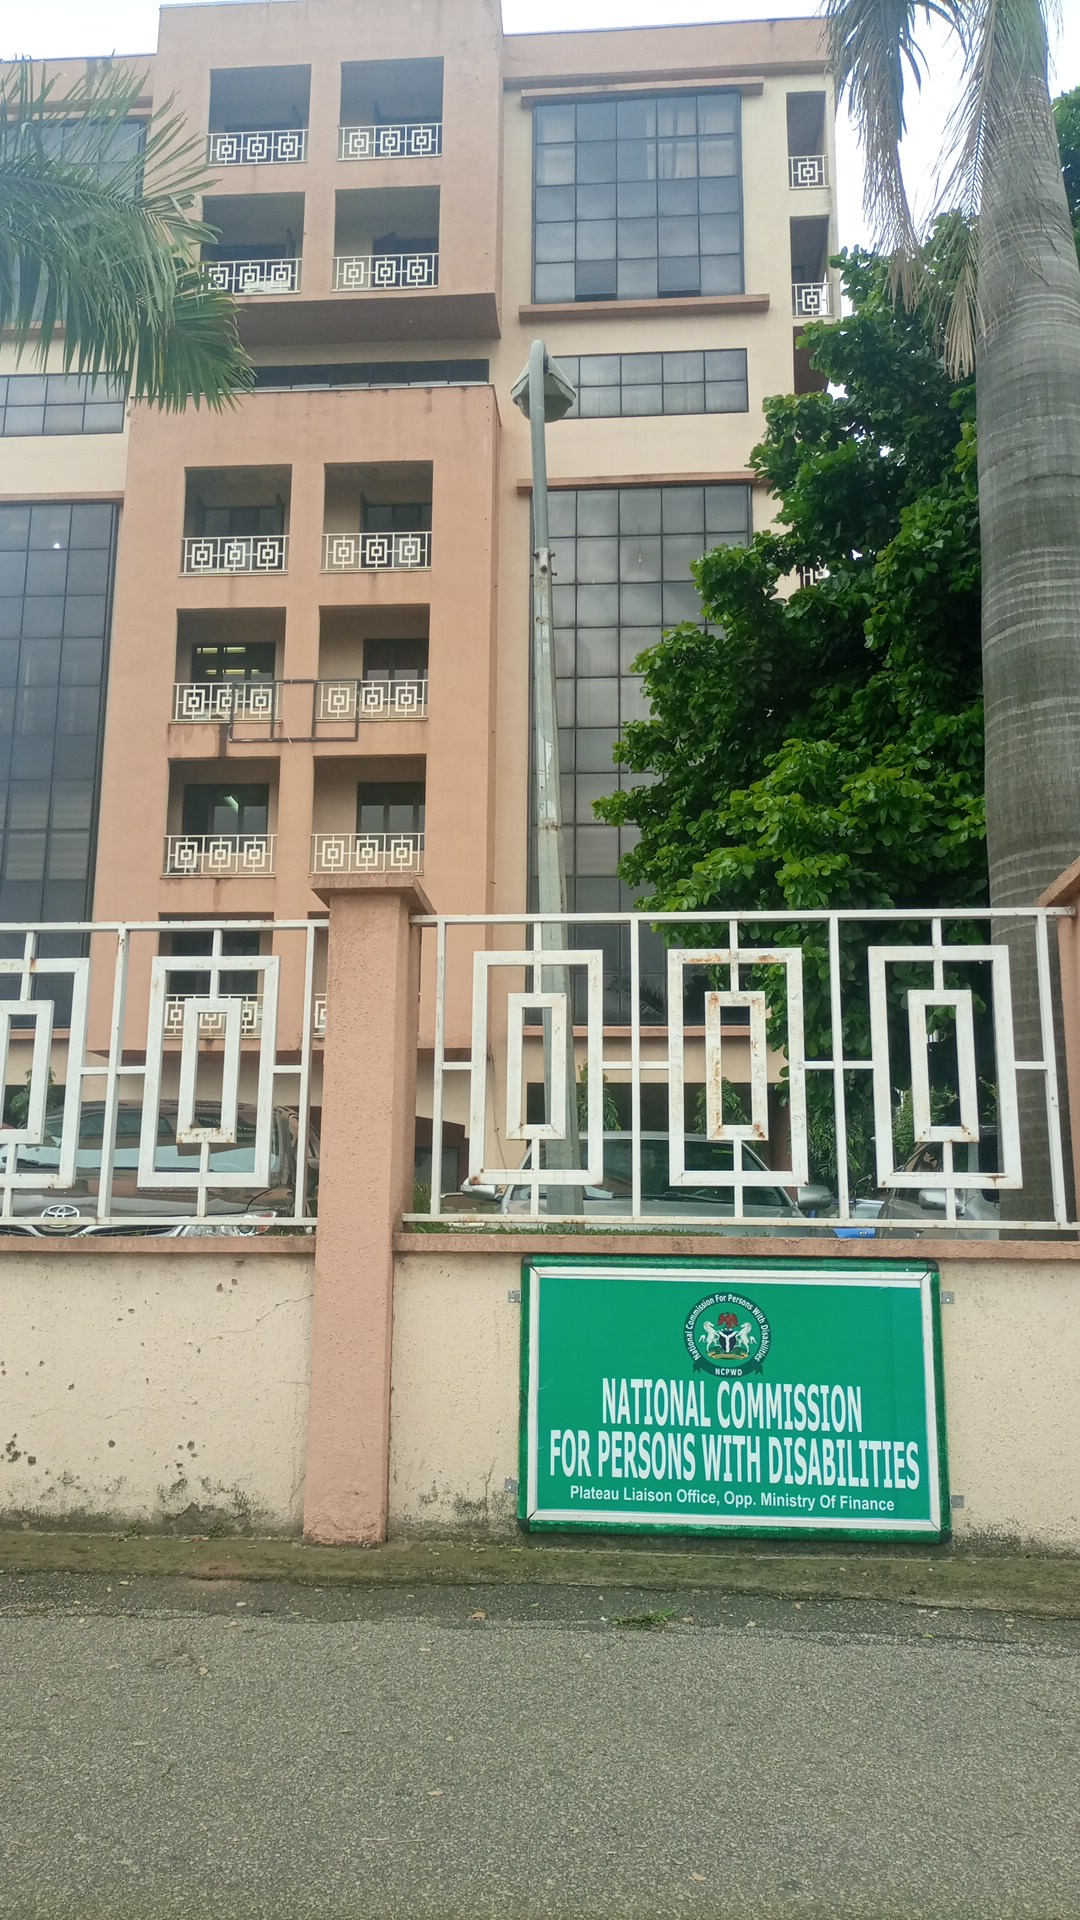 National commission for persons with disabilities